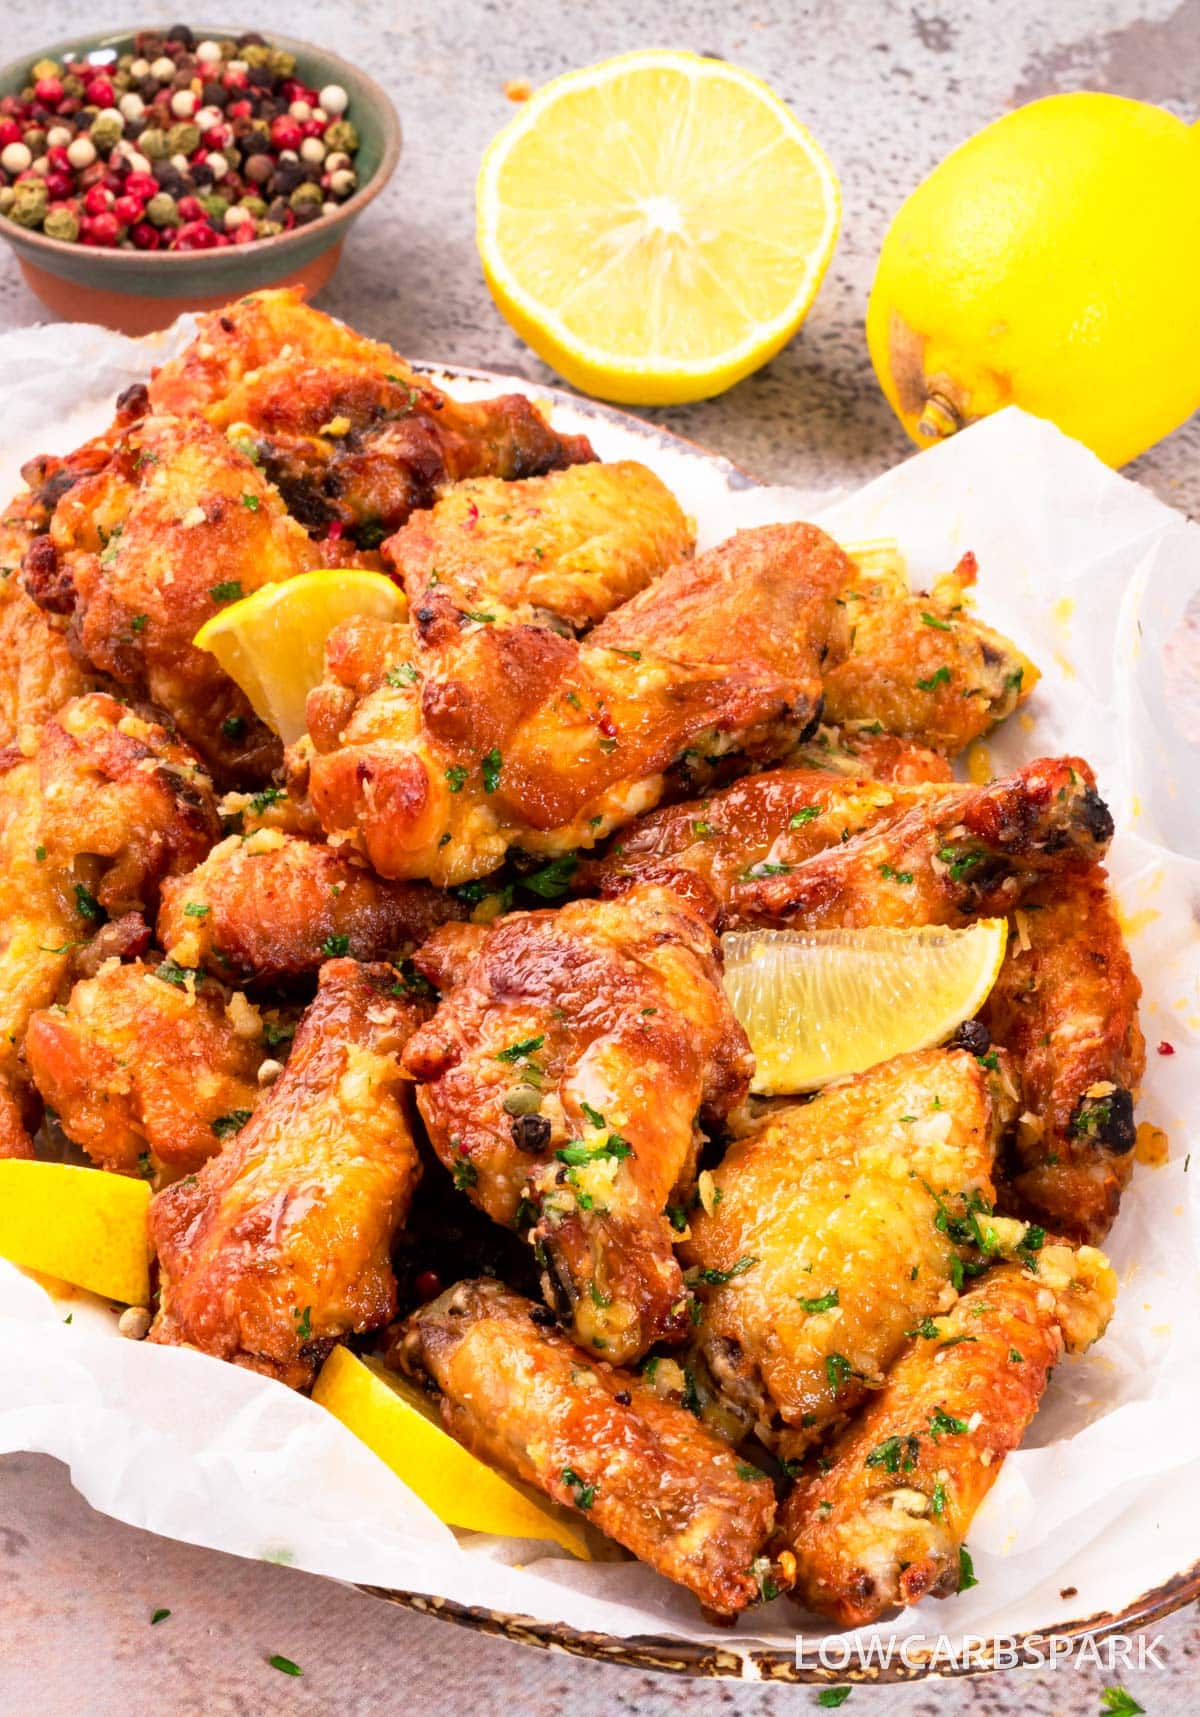 lemon pepper chicken wings in a serving dish with lemon slices served as a garnish.